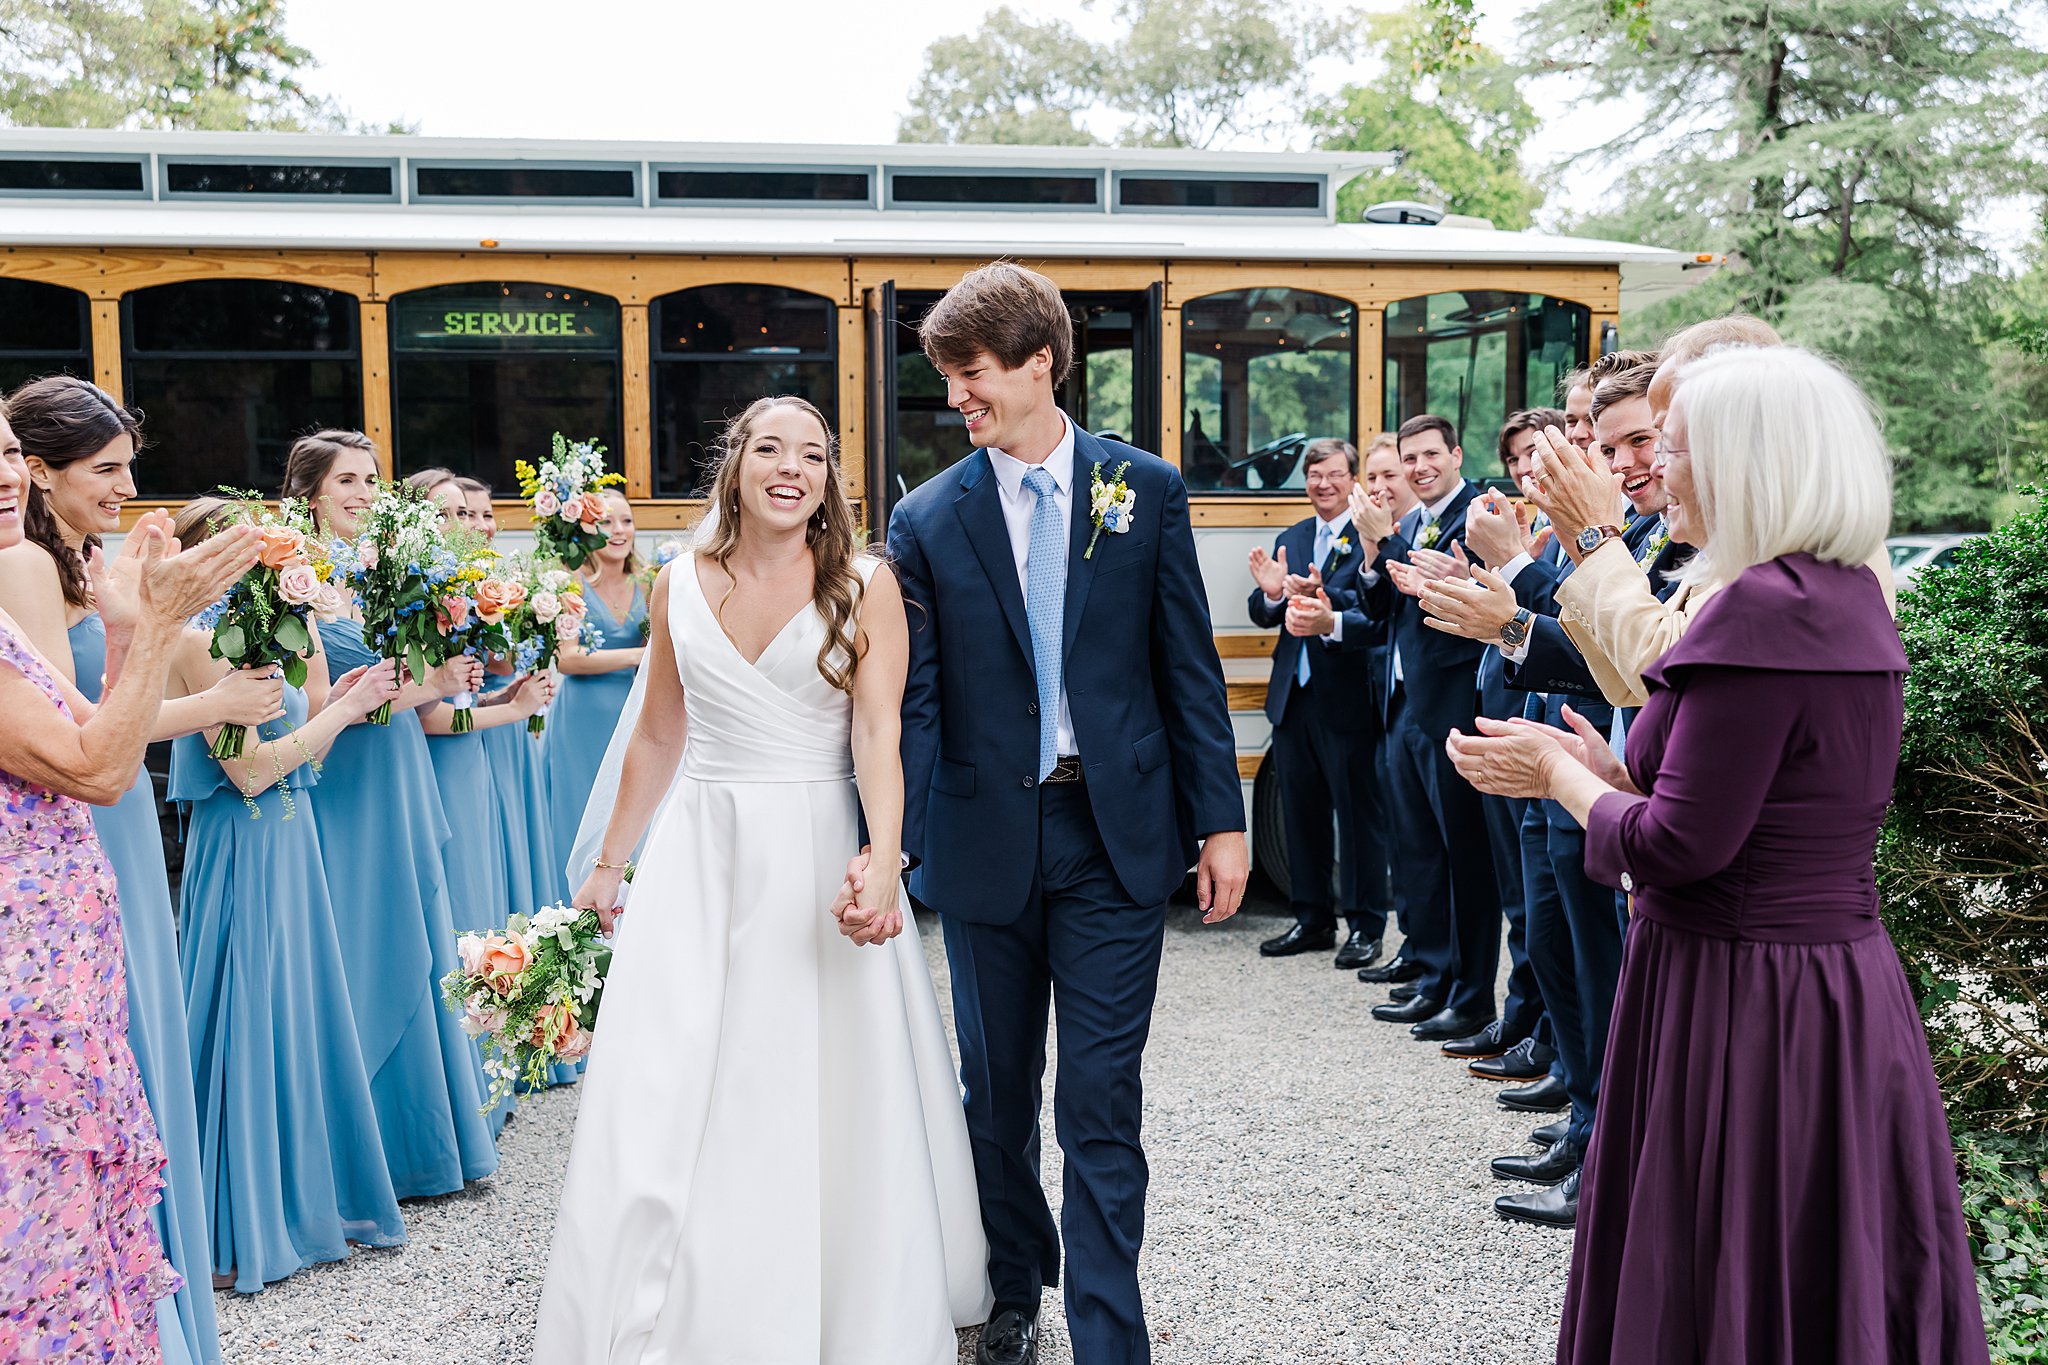 Couple celebrating with RVA Trolley with image by Richmond VA wedding photographer